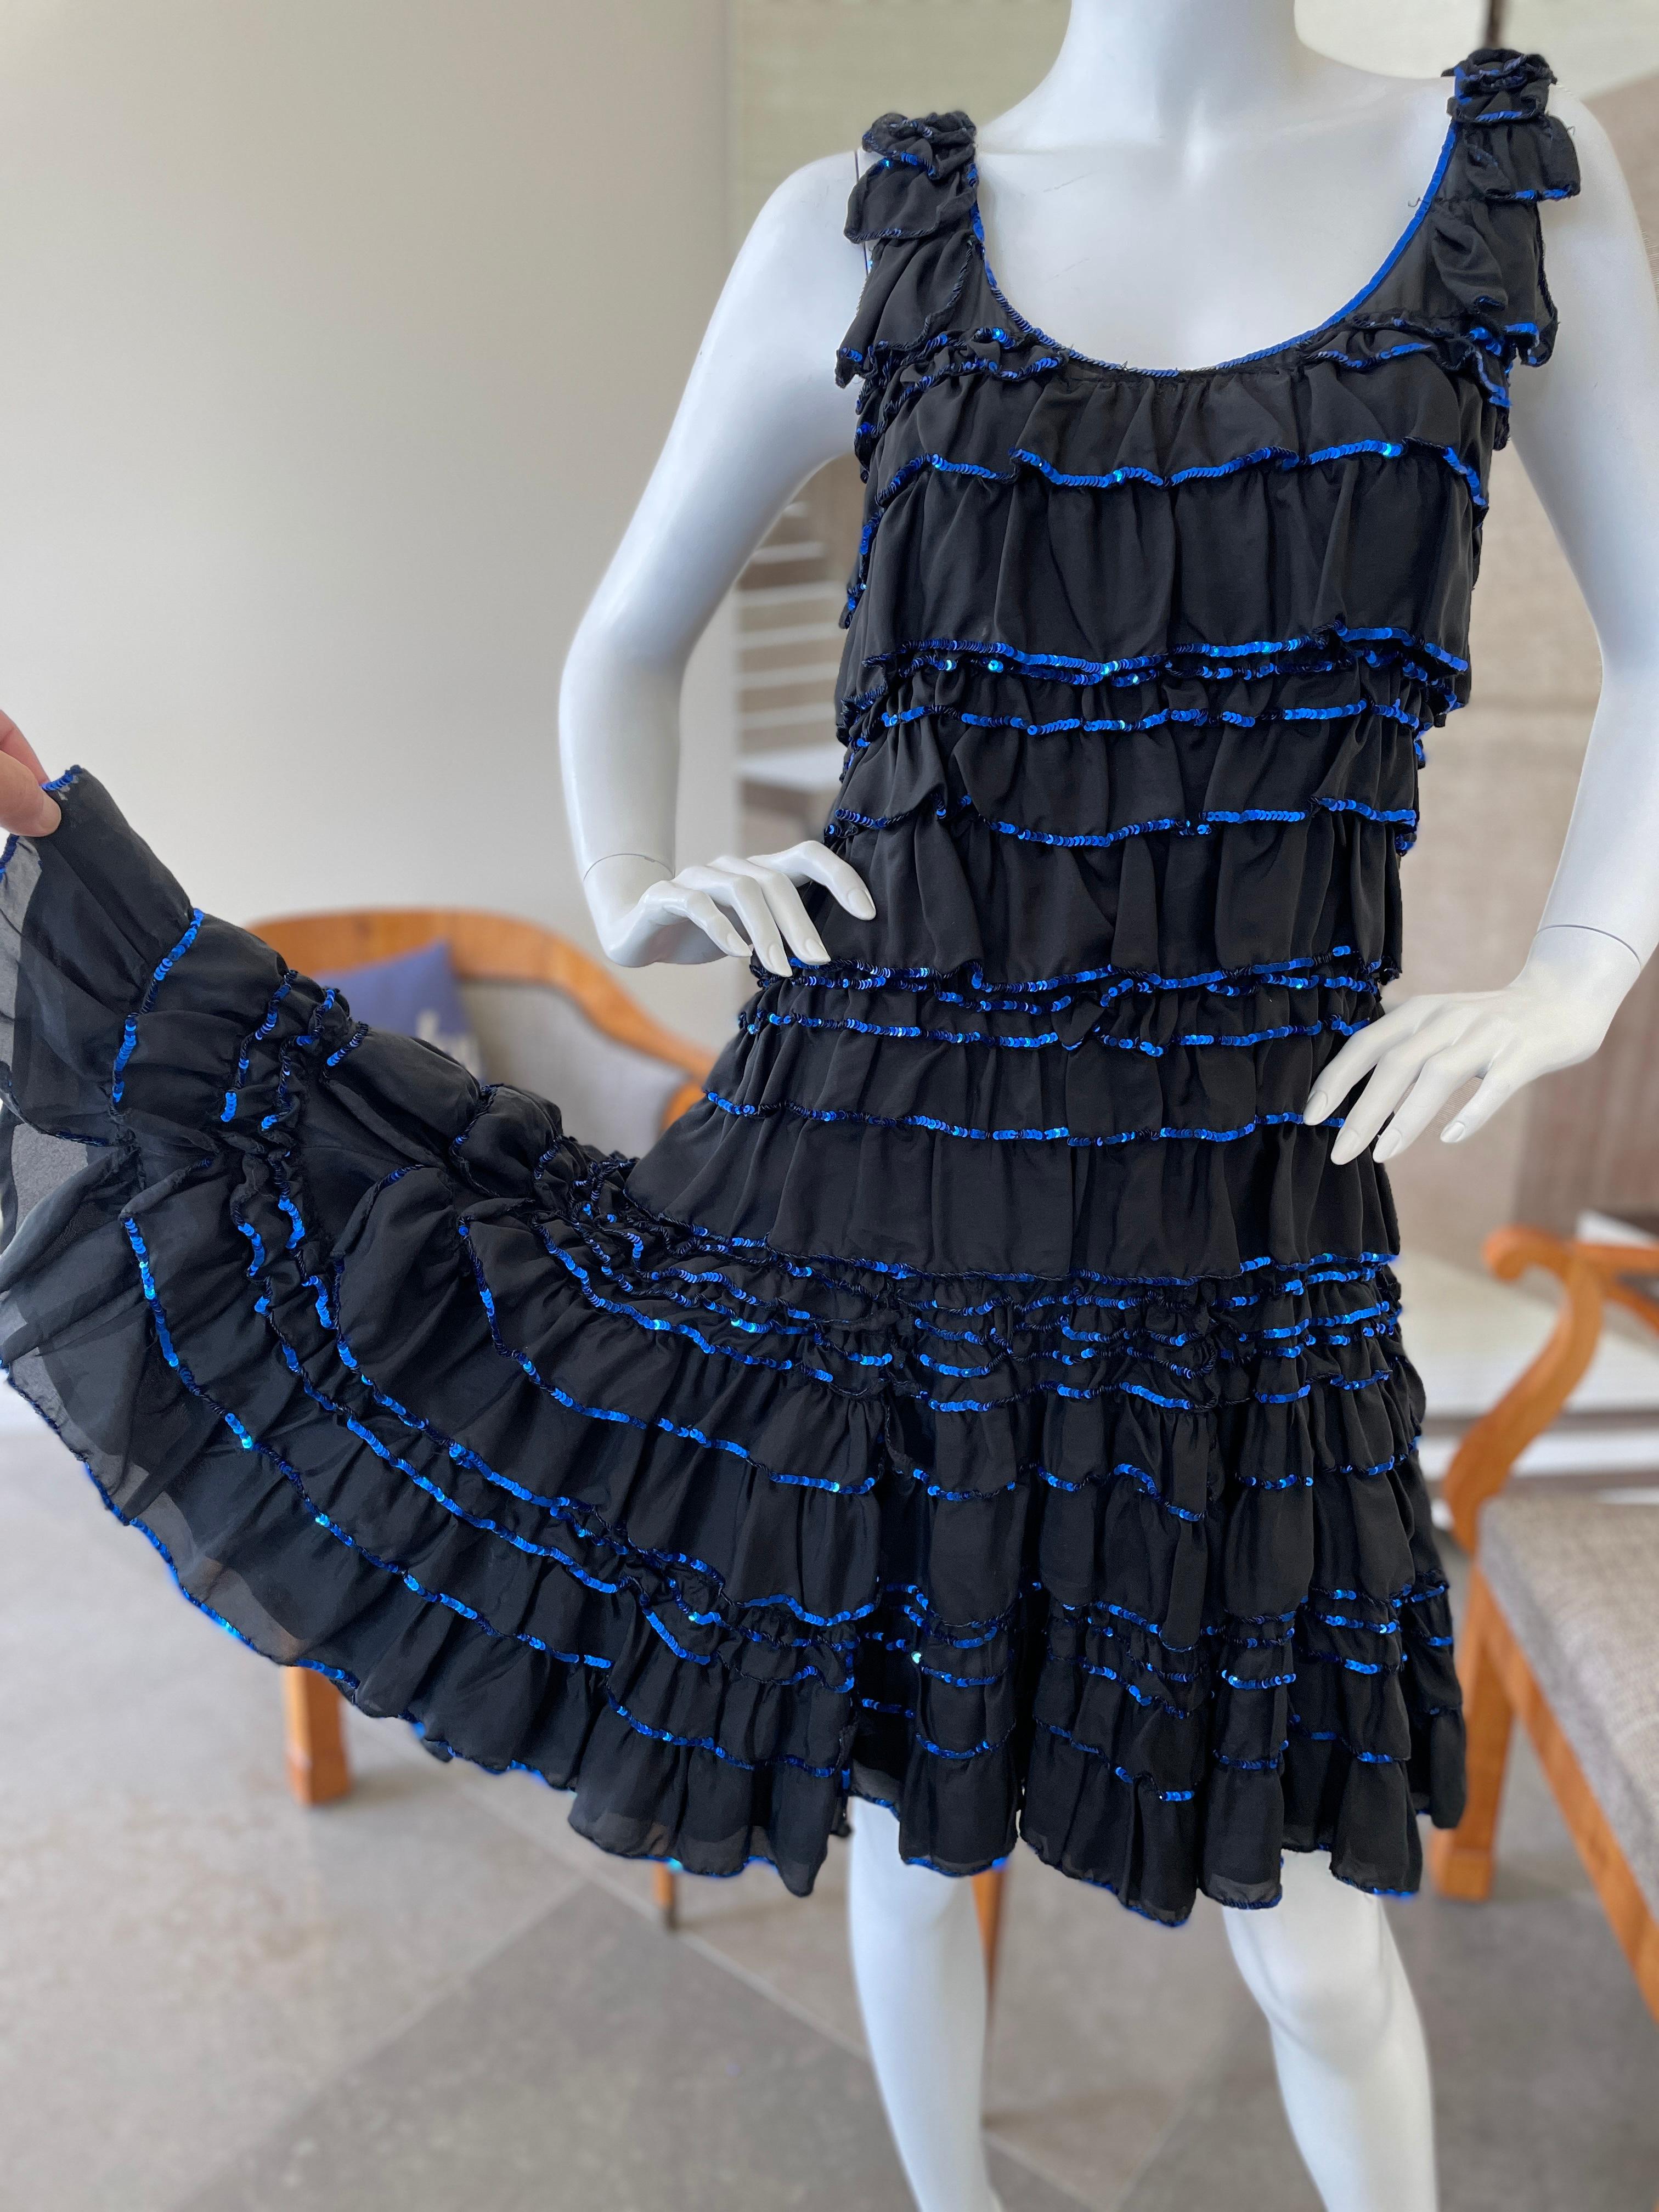 Lanvin by Alber Elbaz Black Ruffle Cocktail Dress w Blue Sequin Trim 
From SS' 2004
 So beautiful, much prettier in person.
This is exquisite.
Size 40
 Bust 36